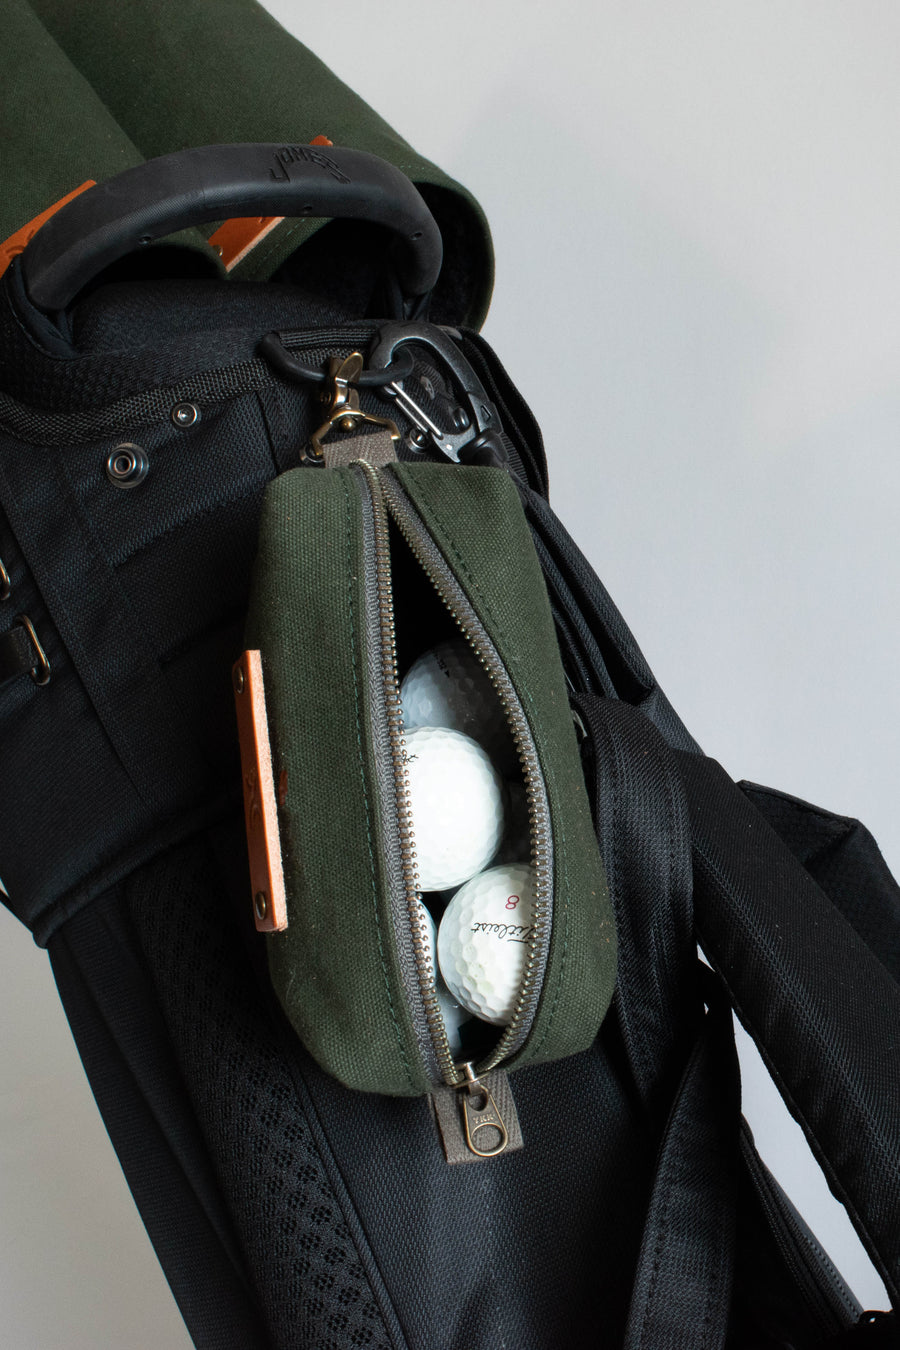 Personalized Golf Valuables Pouch